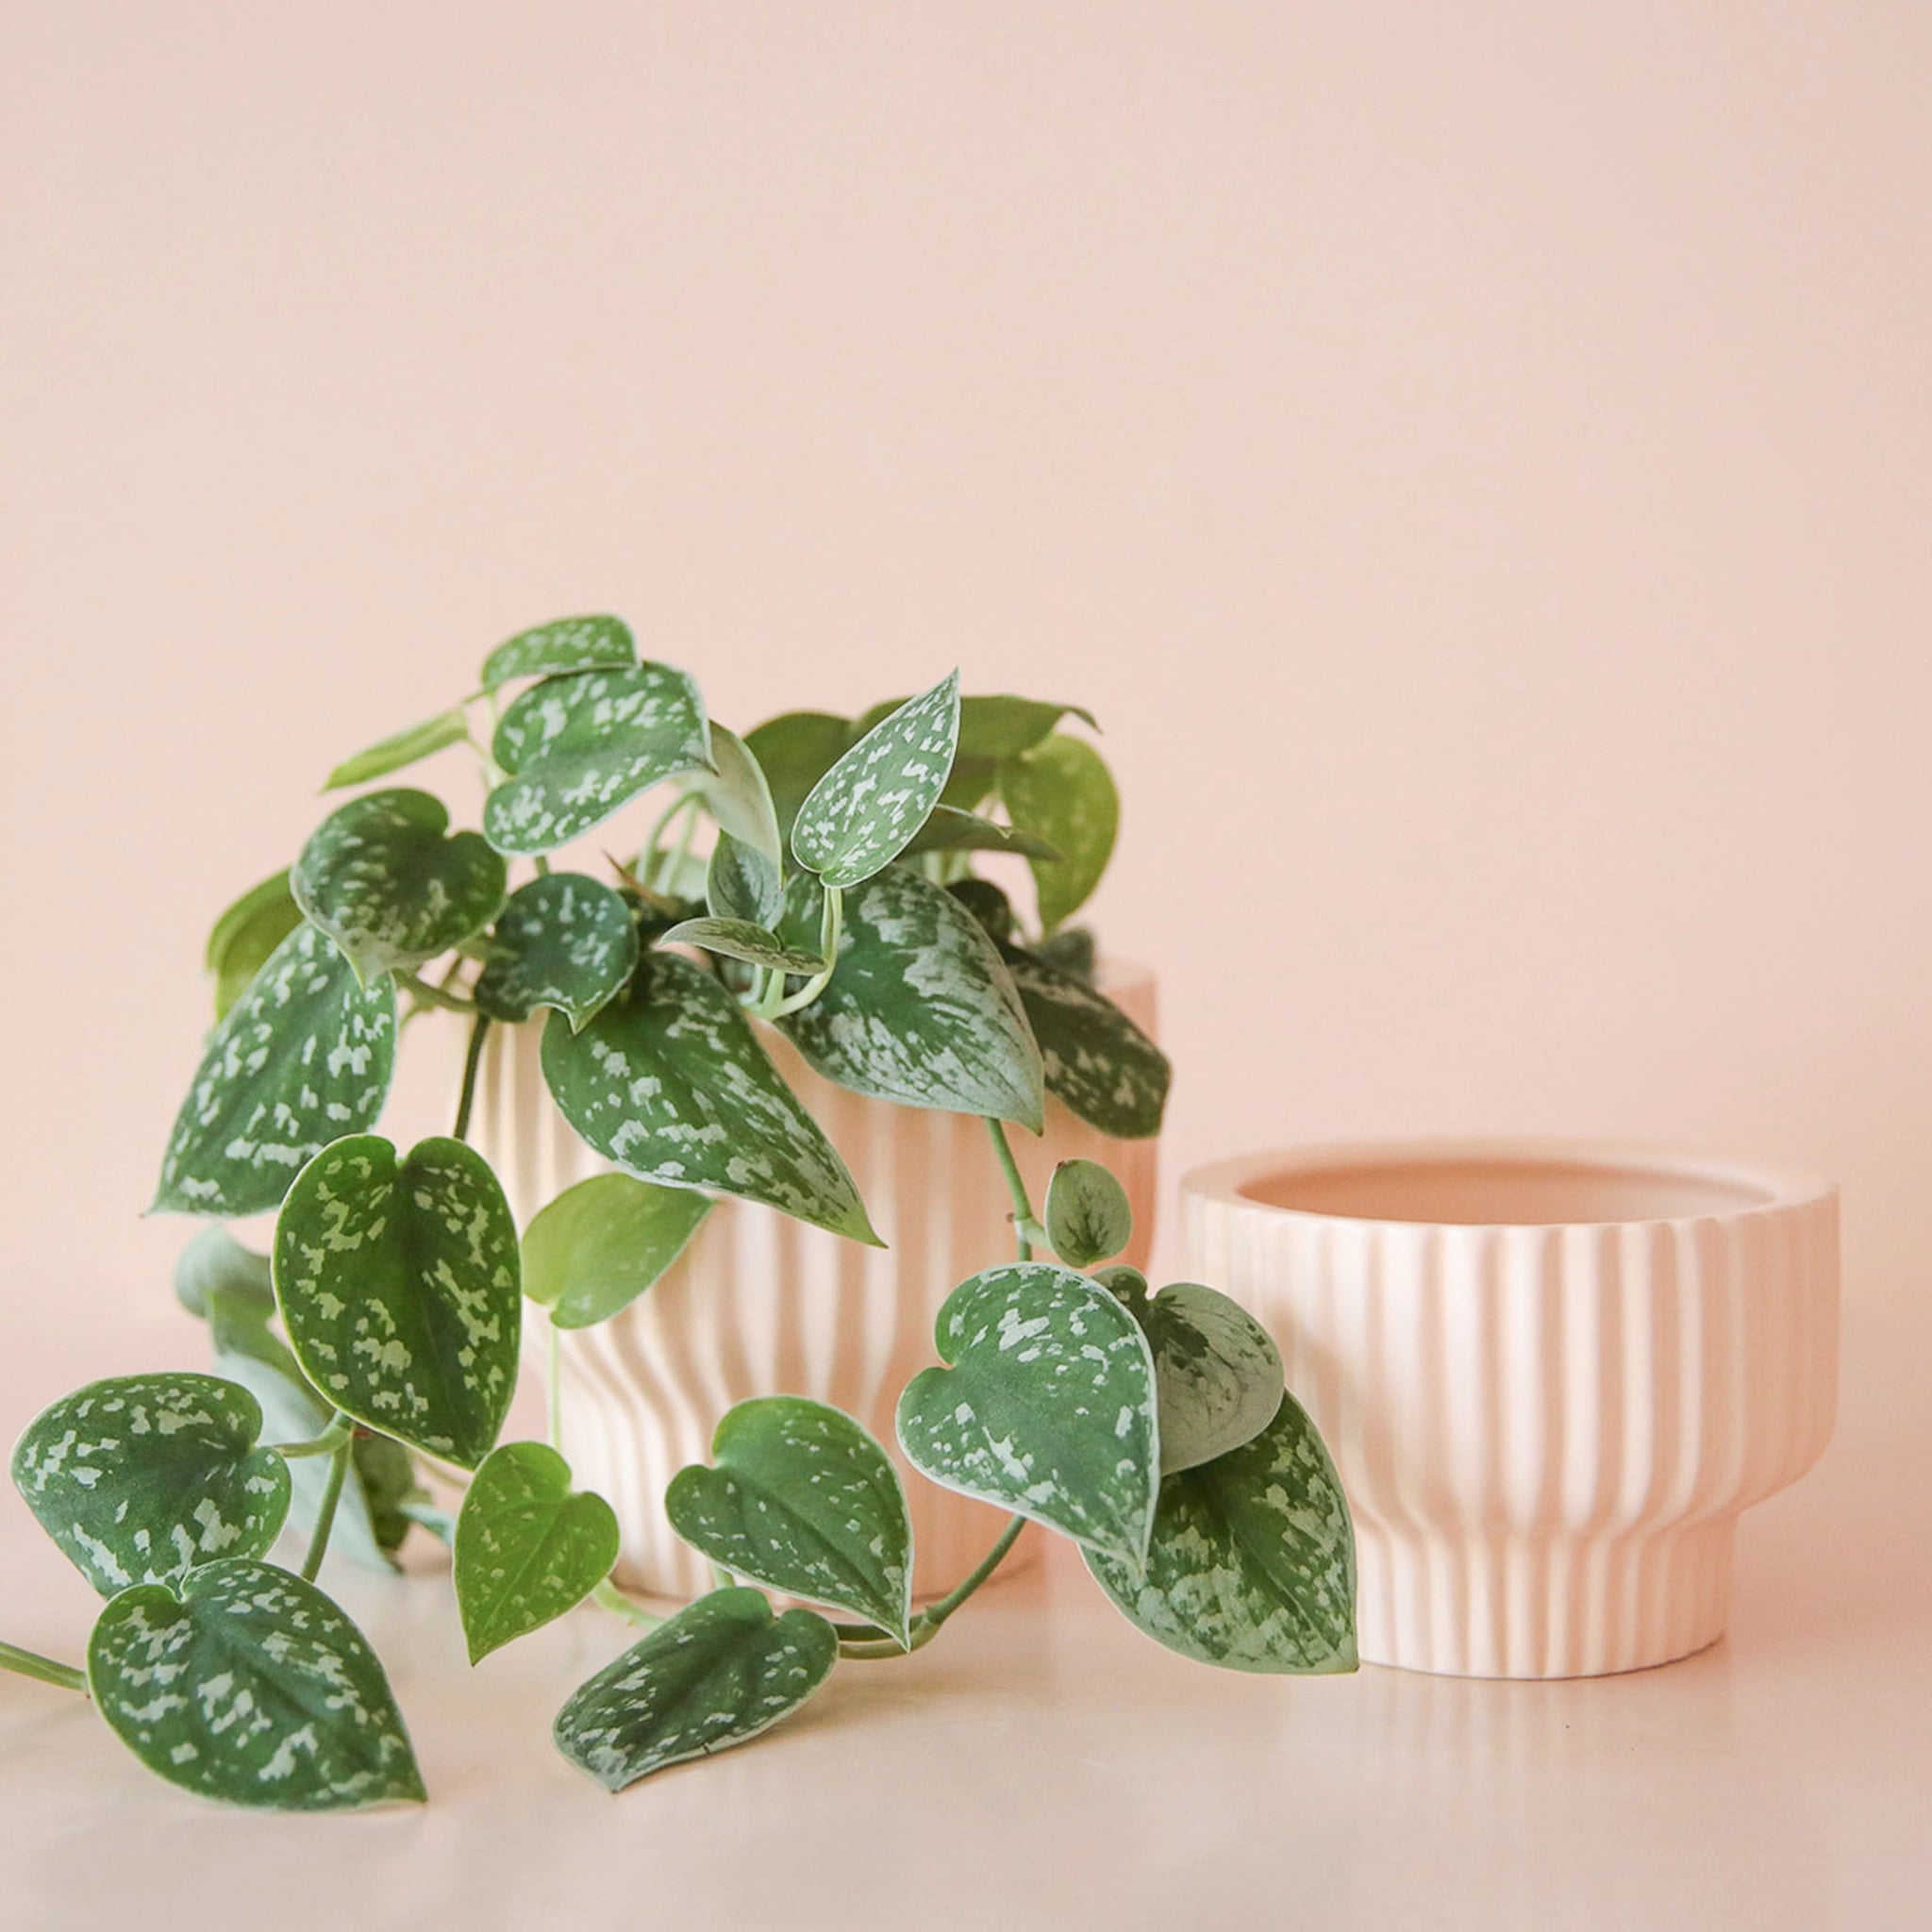 On a peachy background is a light pink ribbed pedestal planter in two different sizes with a vine plant inside the larger or the two.